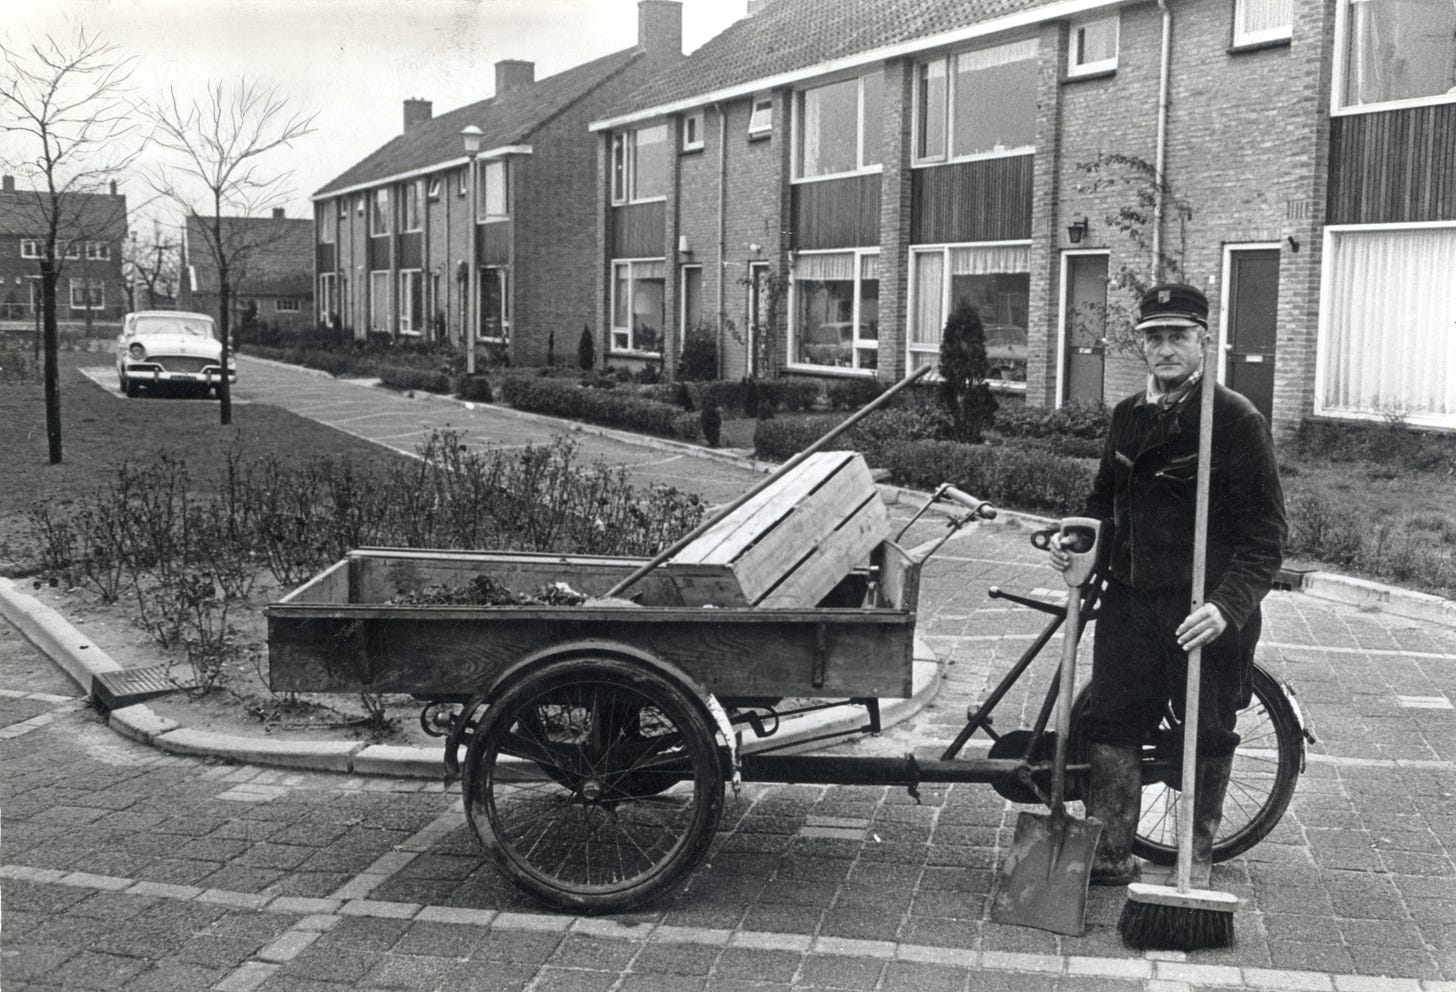 A black and white photo of a street sweeper stood next to his cargobike. He is holding a broom and a shovel. The box on the cargobike is filled with leaves and rubbish